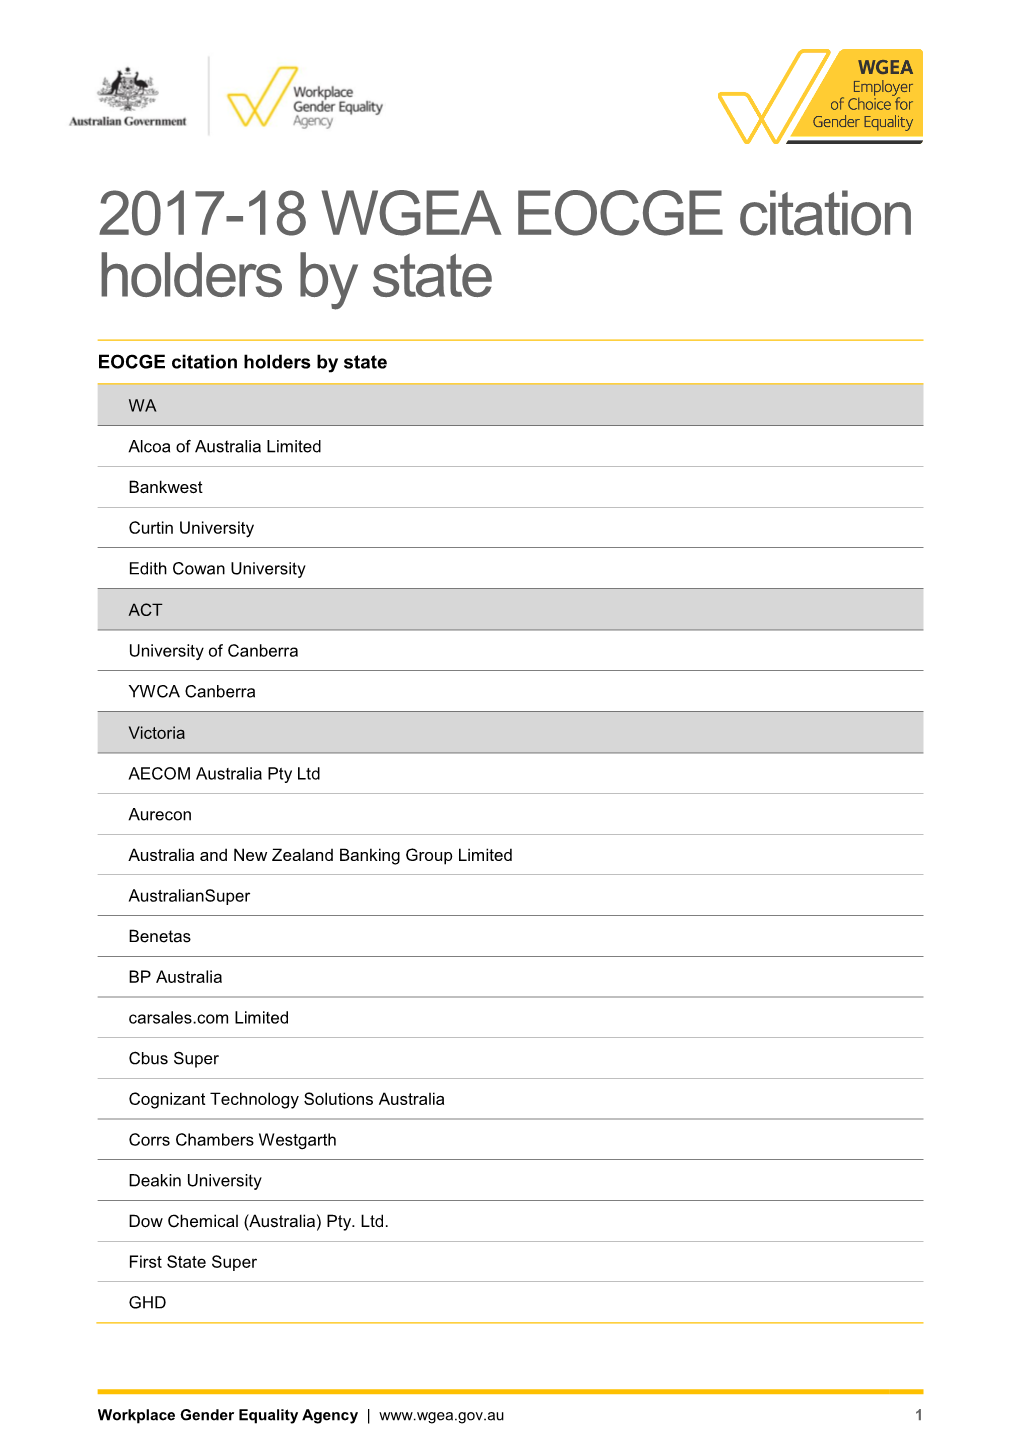 2017-18 WGEA EOCGE Citation Holders by State